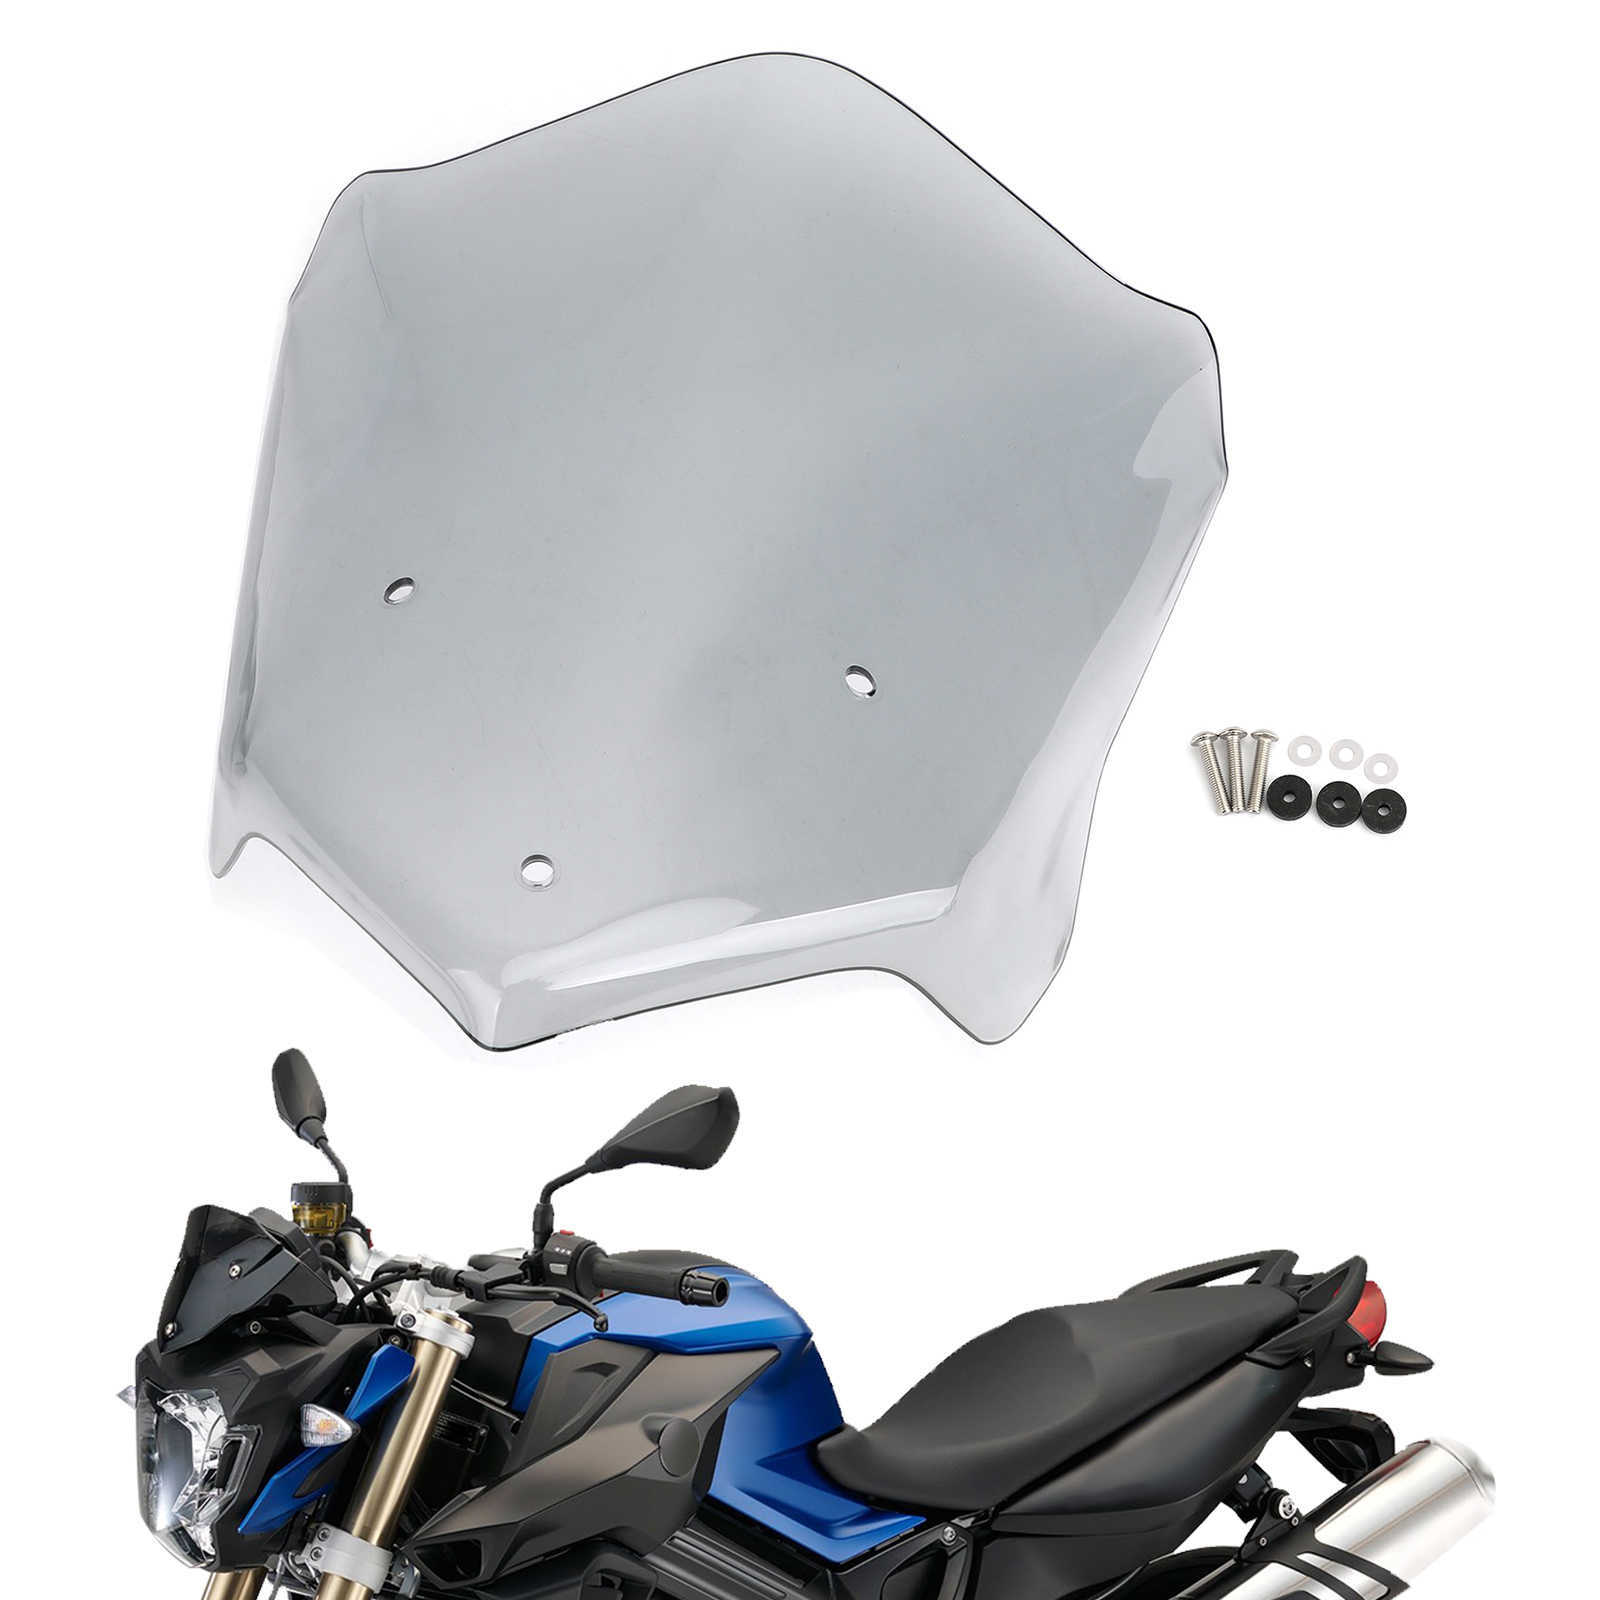 Topteng ABS Plastic Windshield WindScreen for BMW F800R 2015-2020 Motorcycle Accessories 0203